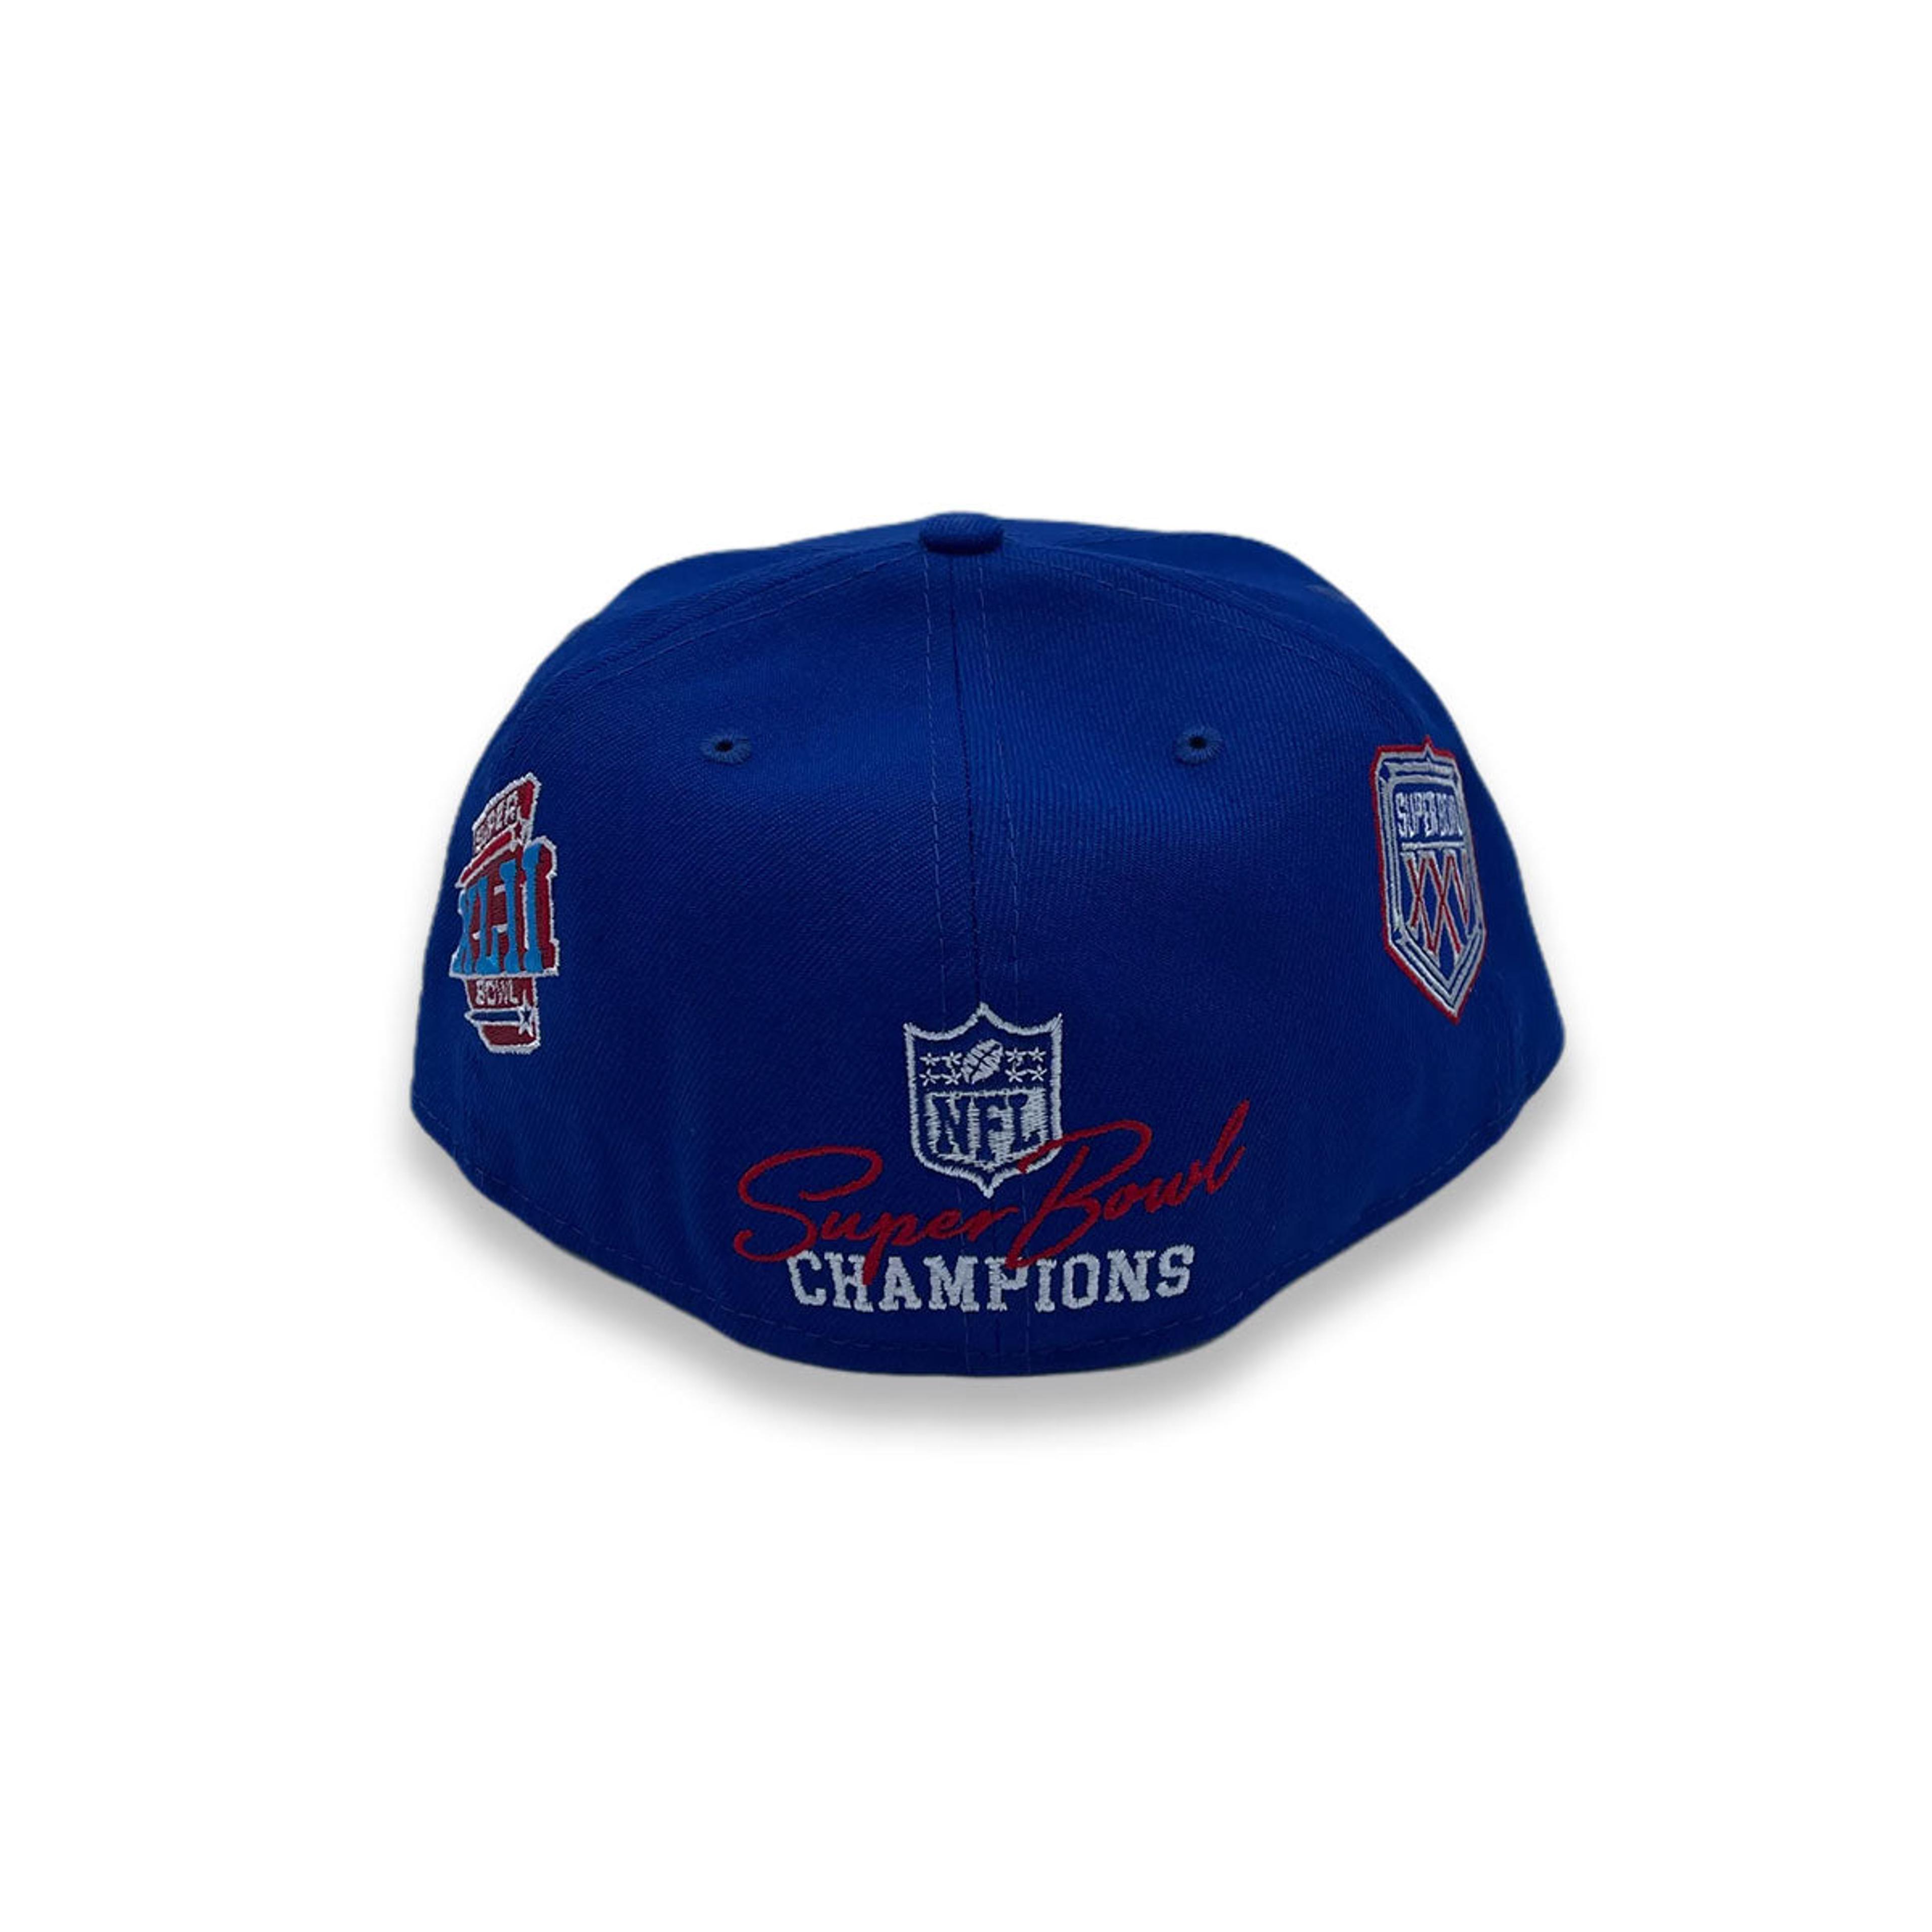 Alternate View 4 of New Era 59Fifty New York Giants 'Count the Rings' Fitted Hat Roy